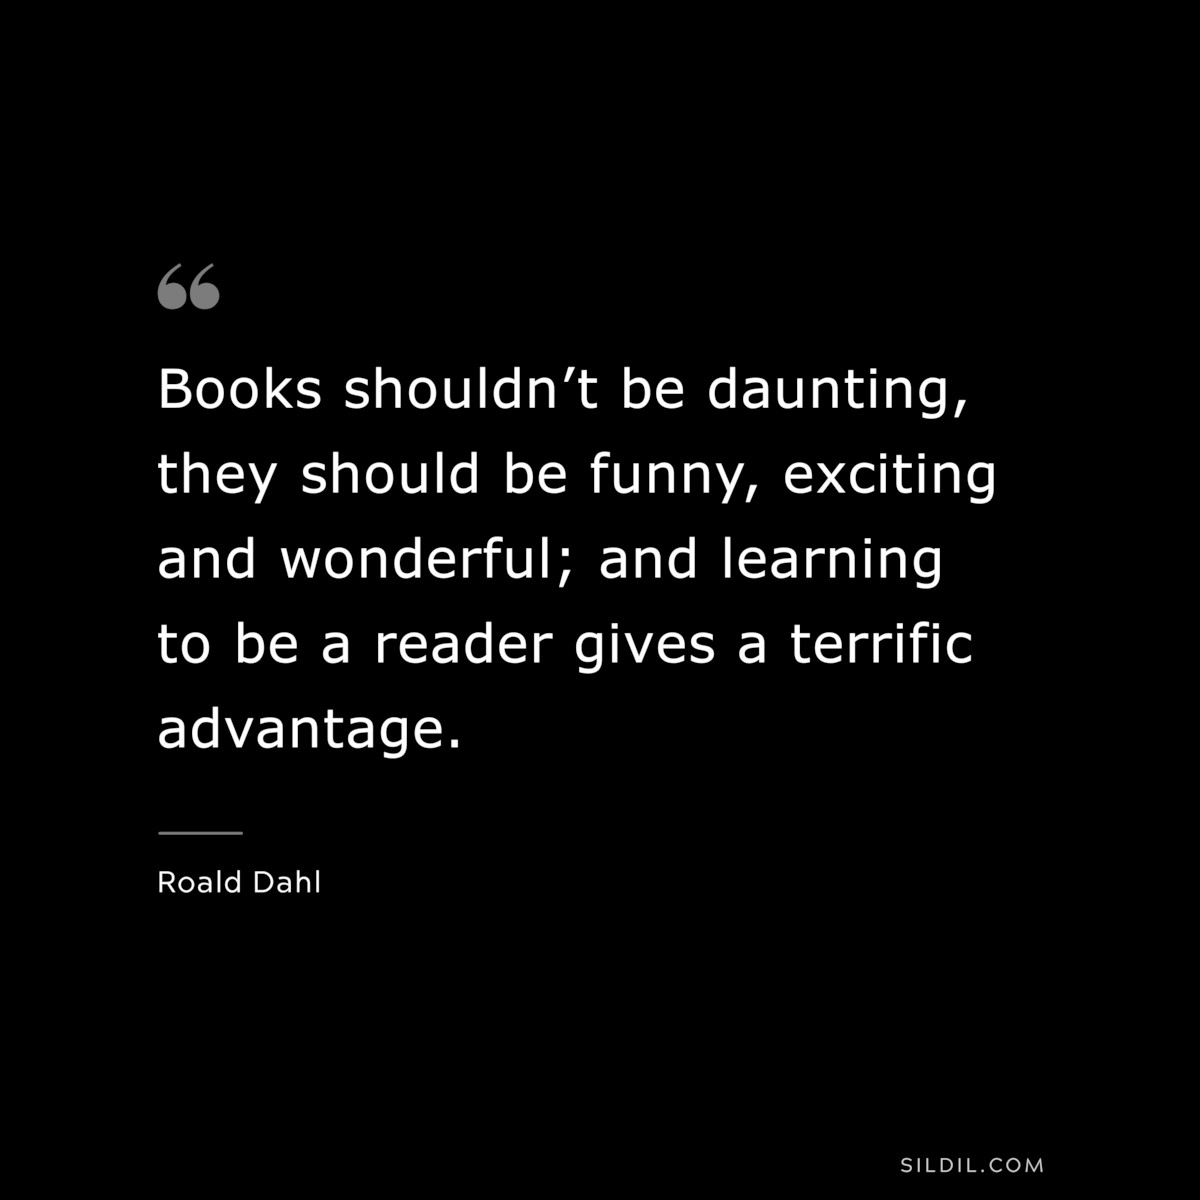 Books shouldn’t be daunting, they should be funny, exciting and wonderful; and learning to be a reader gives a terrific advantage. ― Roald Dahl